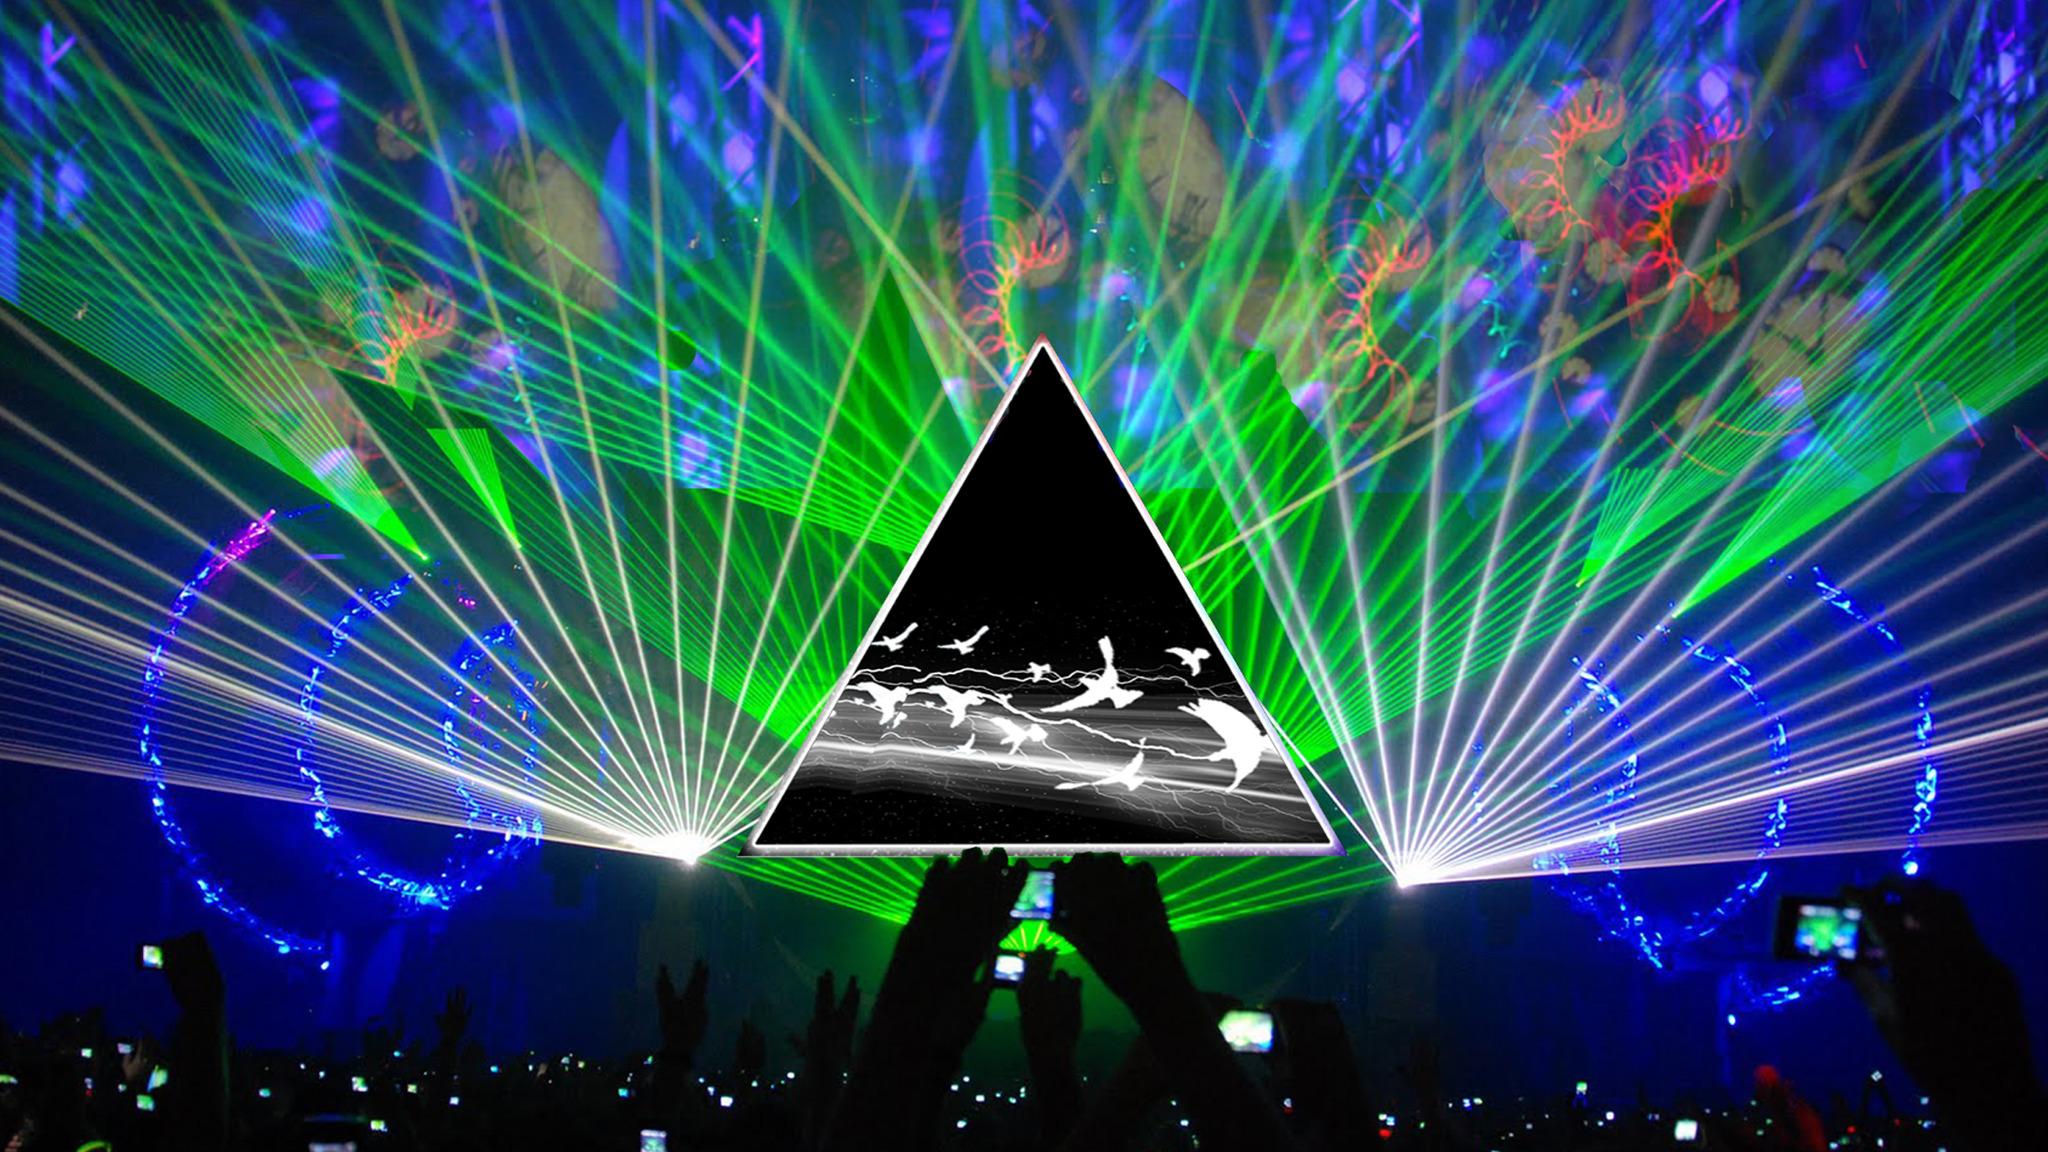 Paramount's Laser Spectacular Featuring The Music Of Pink Floyd